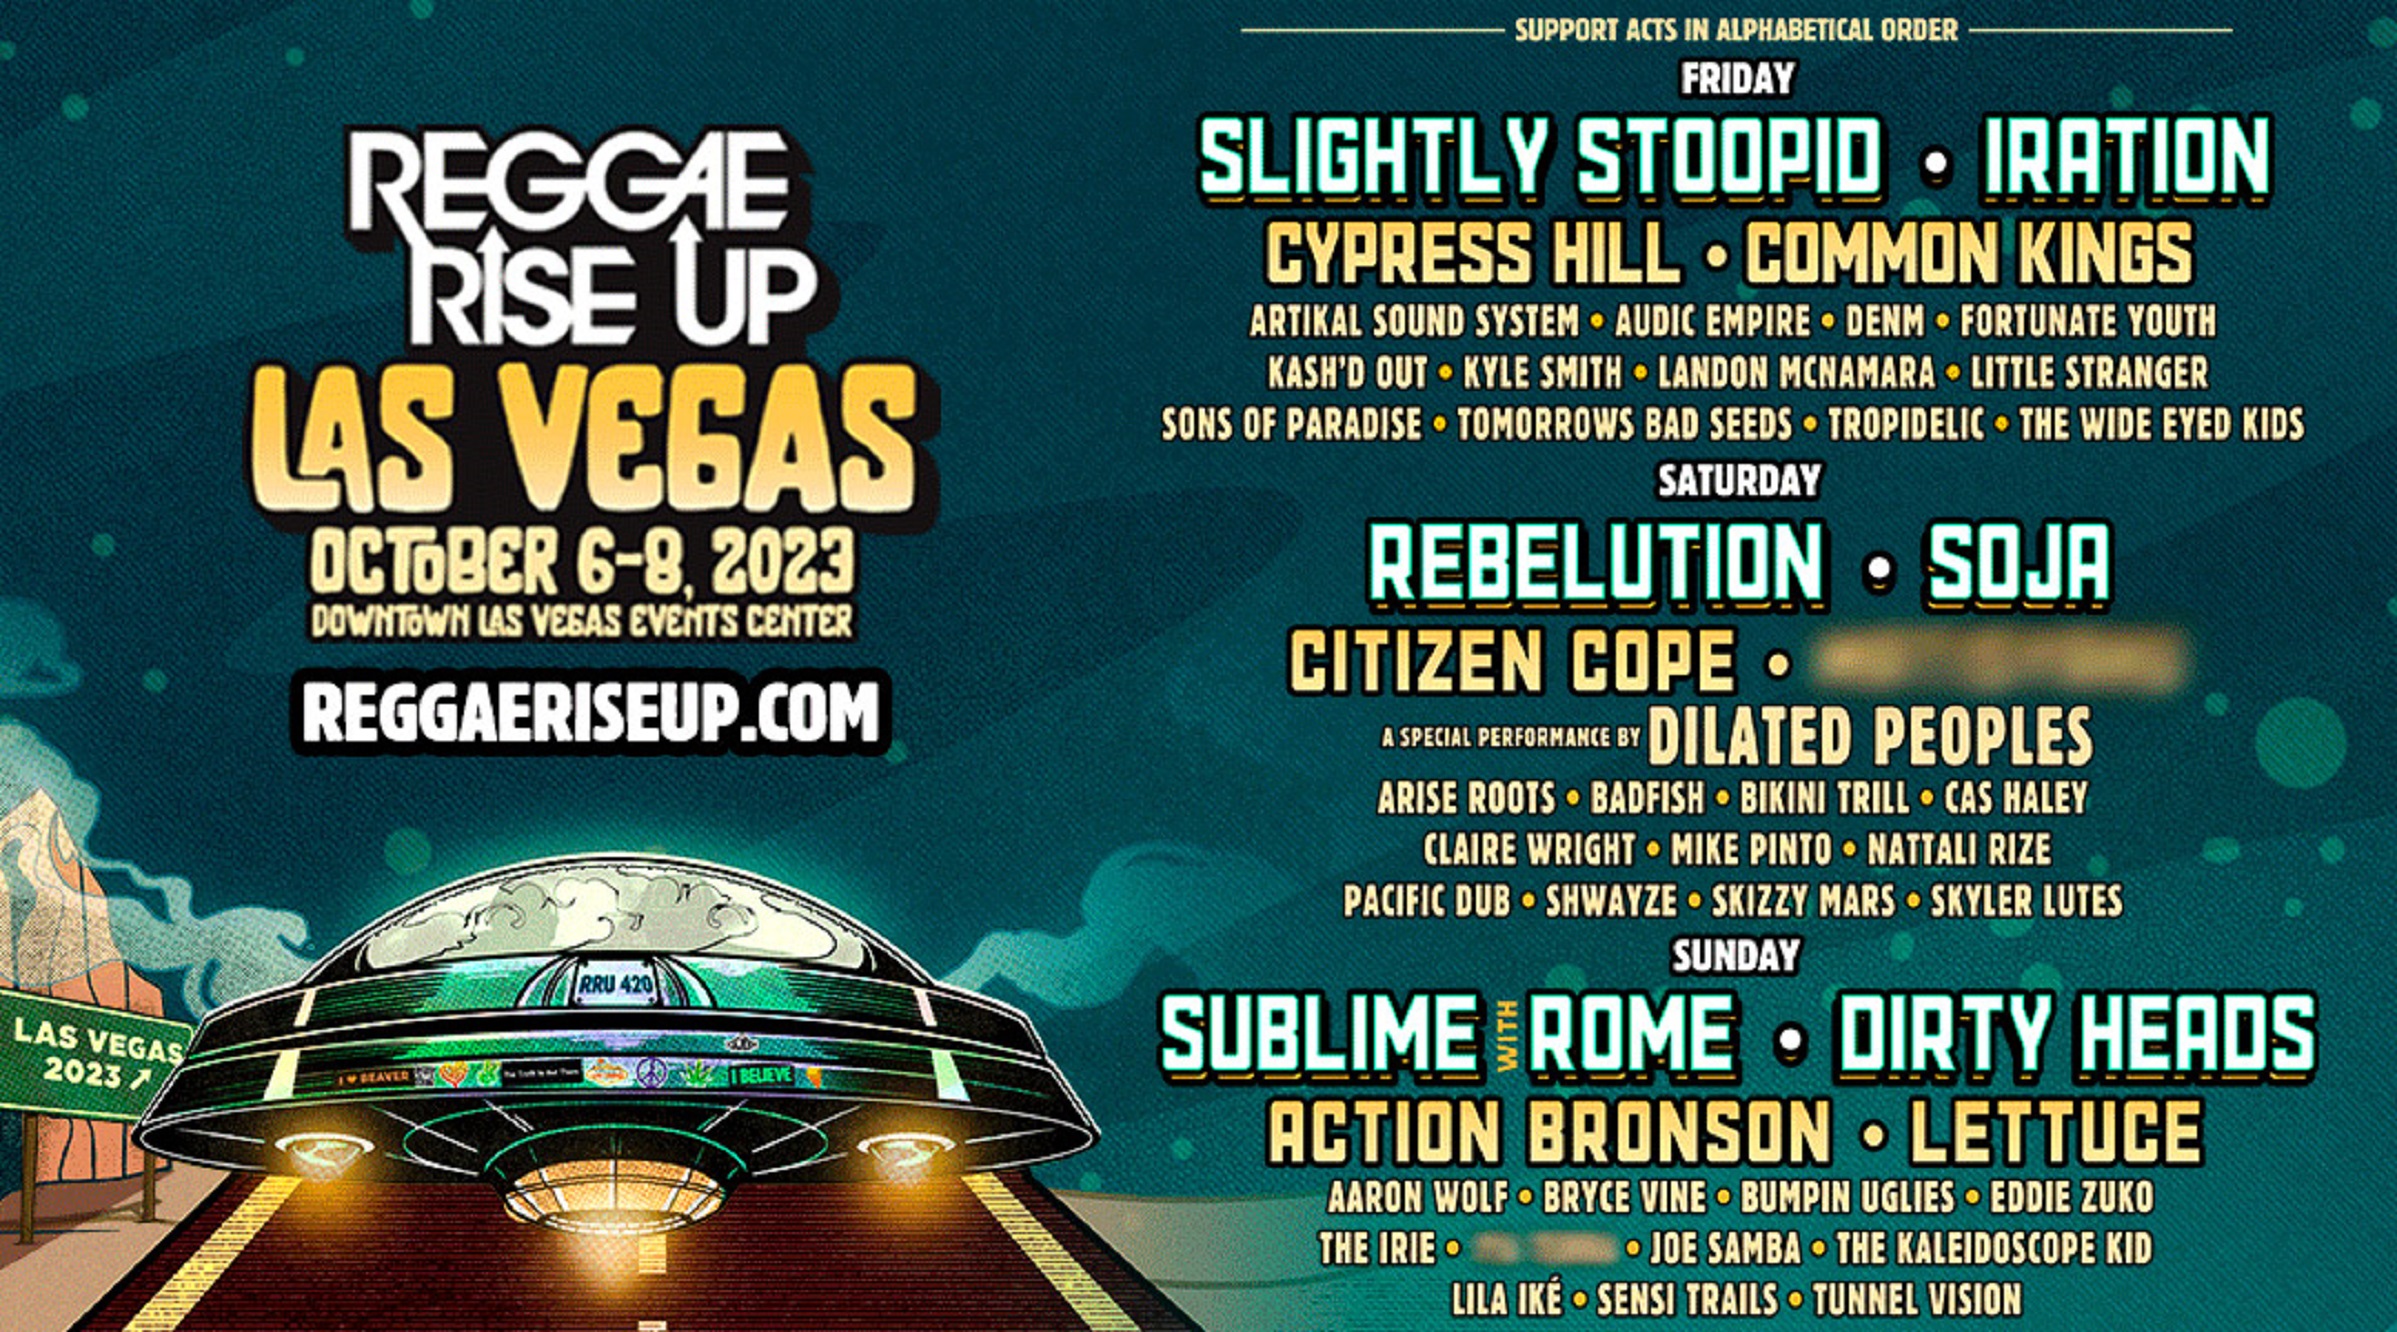 BUMPIN UGLIES Set for RISE UP Main Stage at REGGAE RISE UP VEGAS, Sunday October 8th